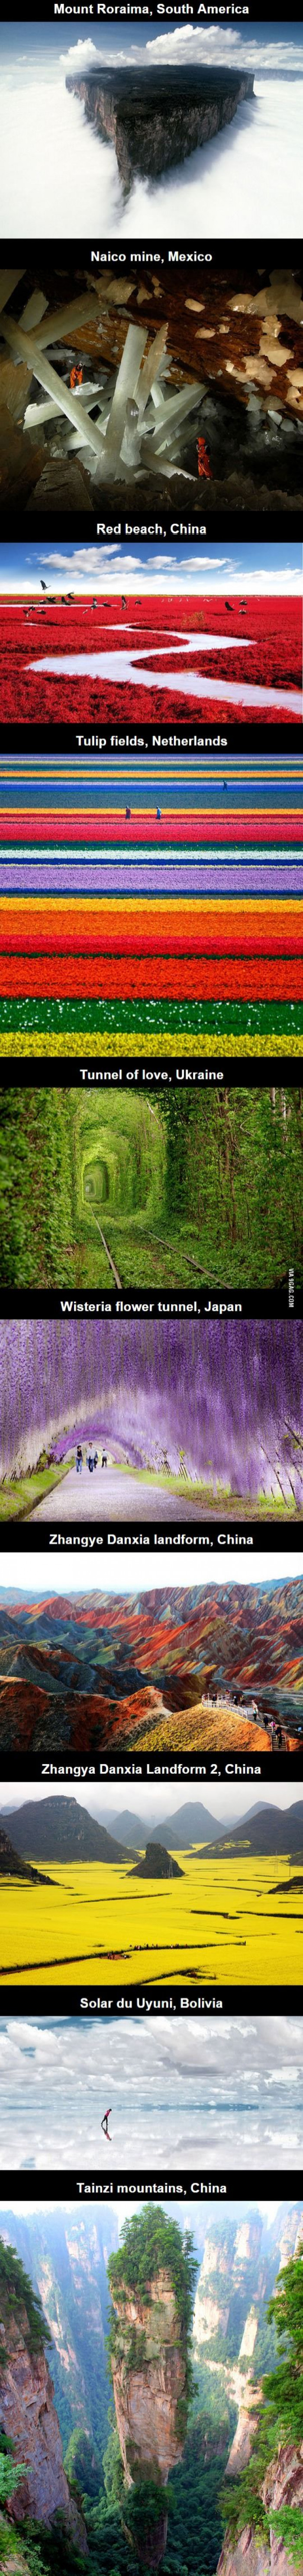 10 Incredible Places That Don't Look Real